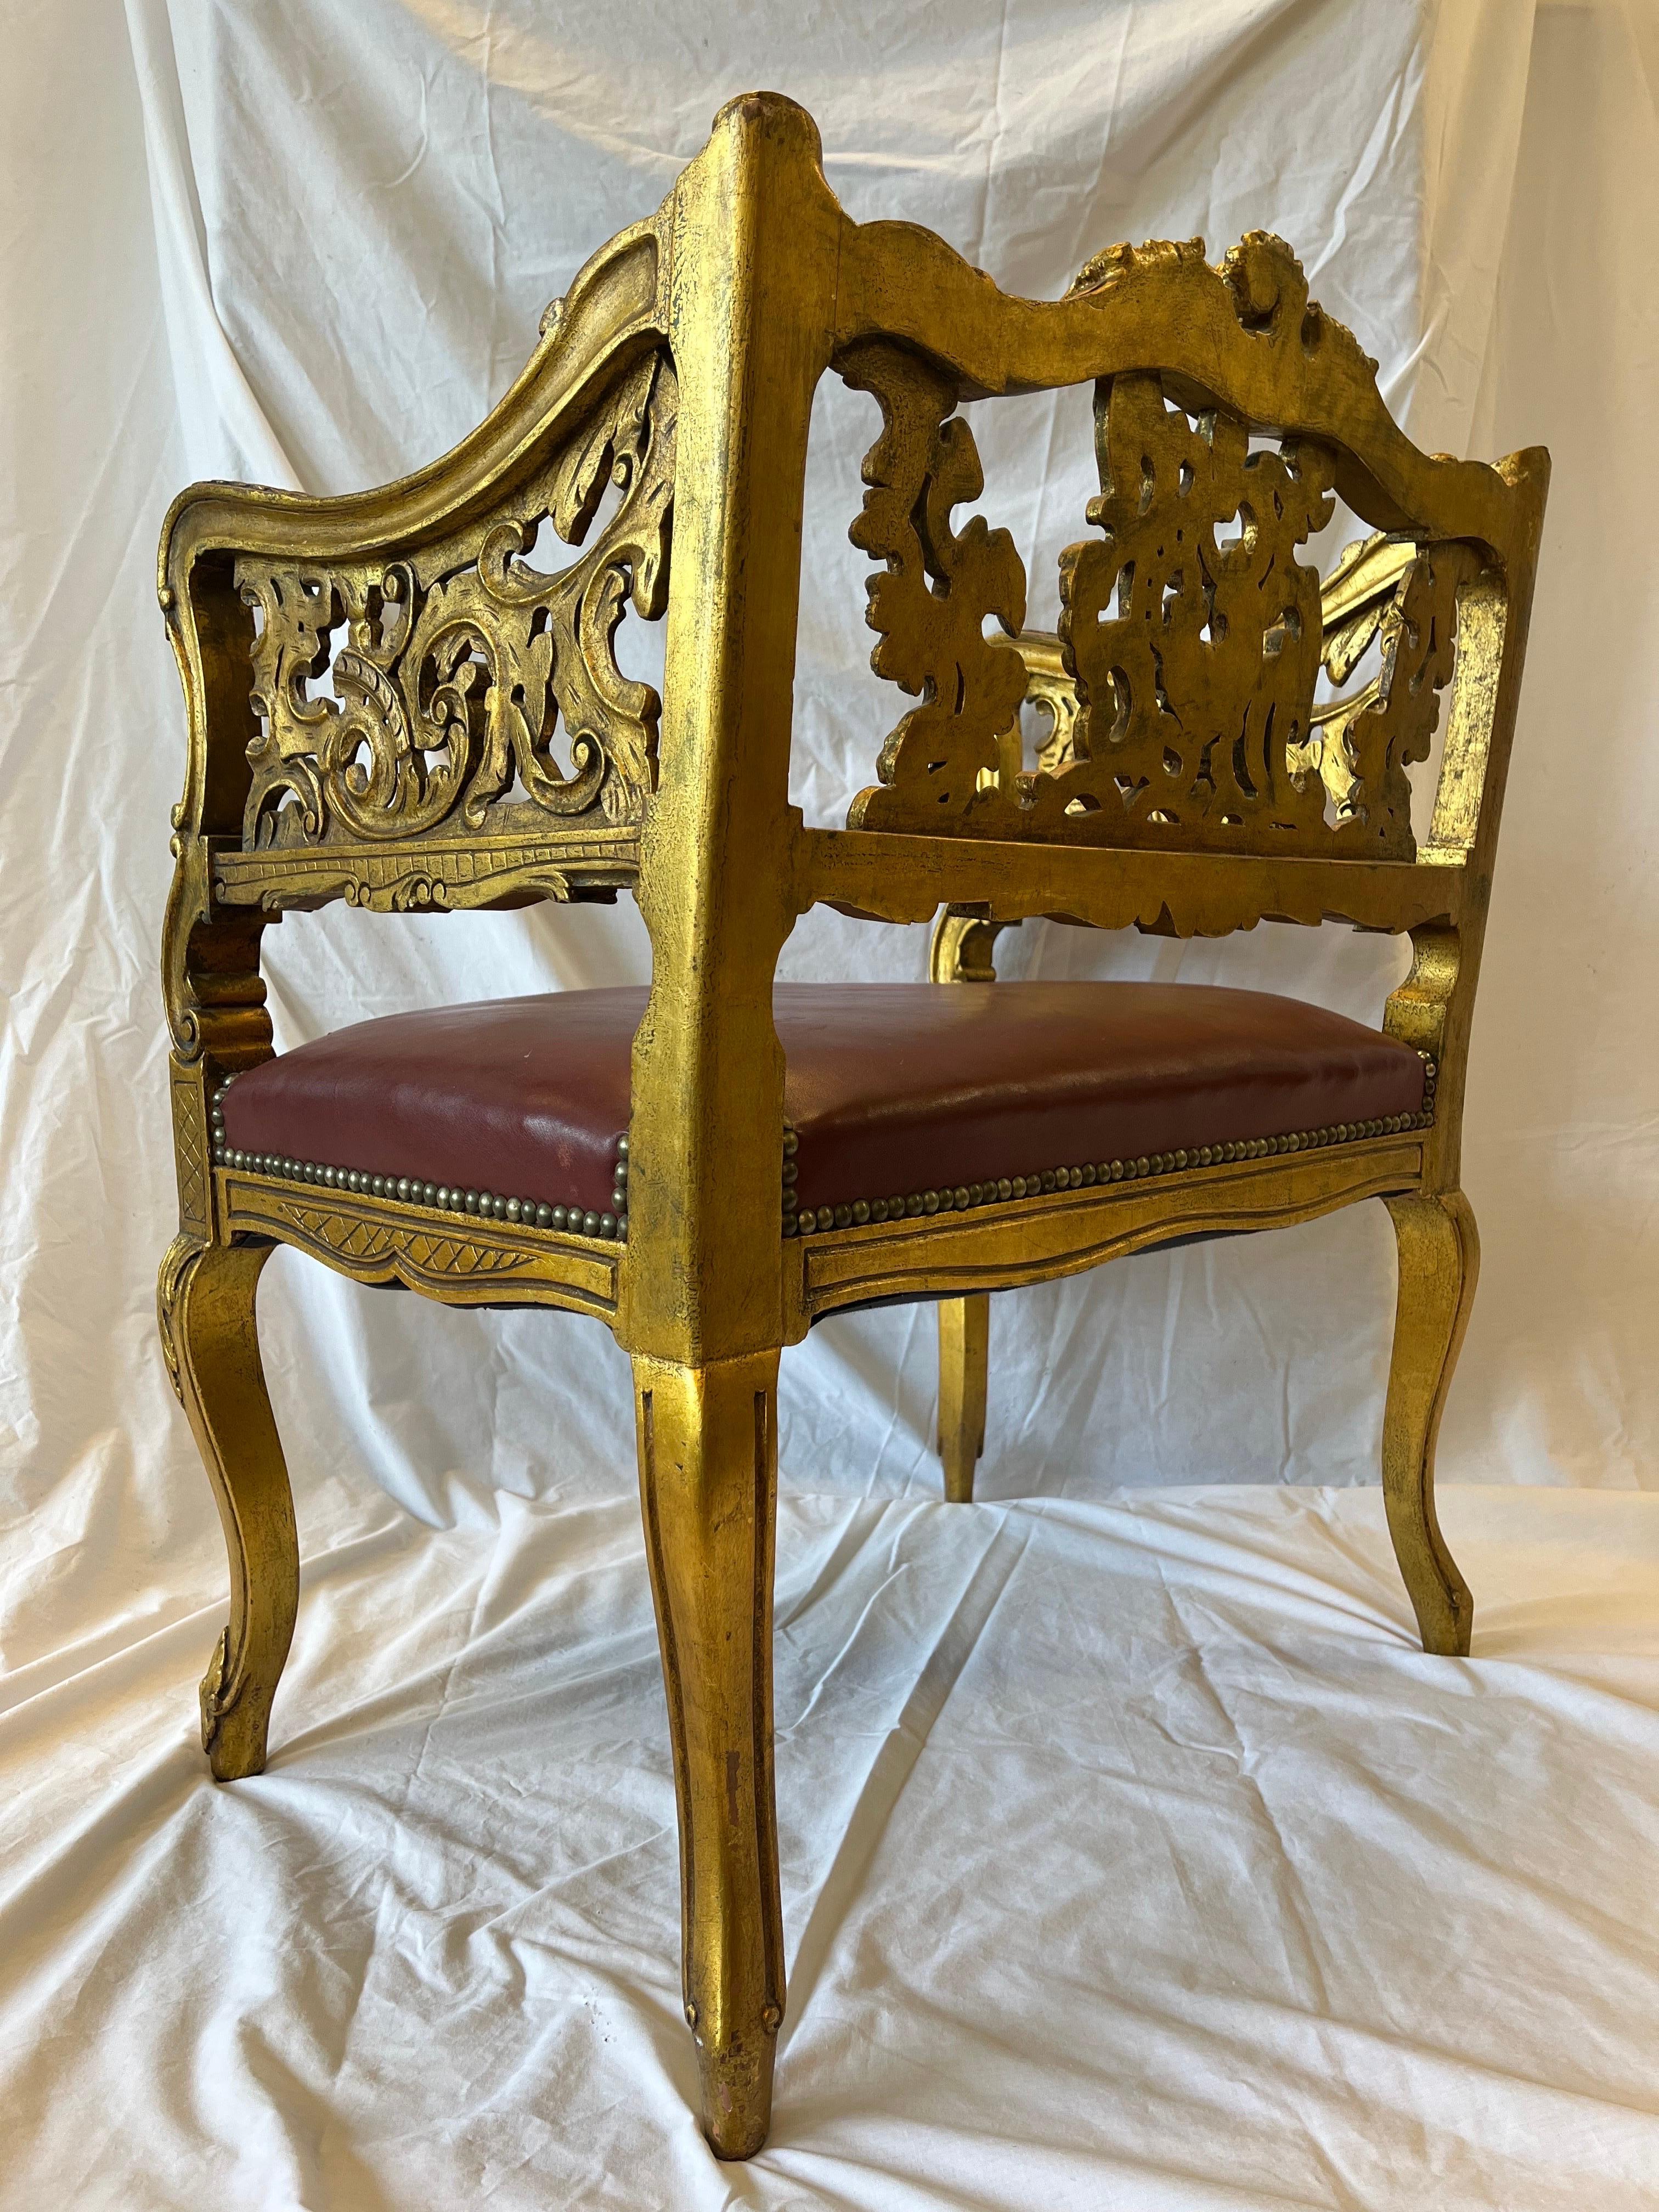 Antique Carved and Gilt Wood Arm Chair Bench Ornate Design Red Upholstered Seat For Sale 11